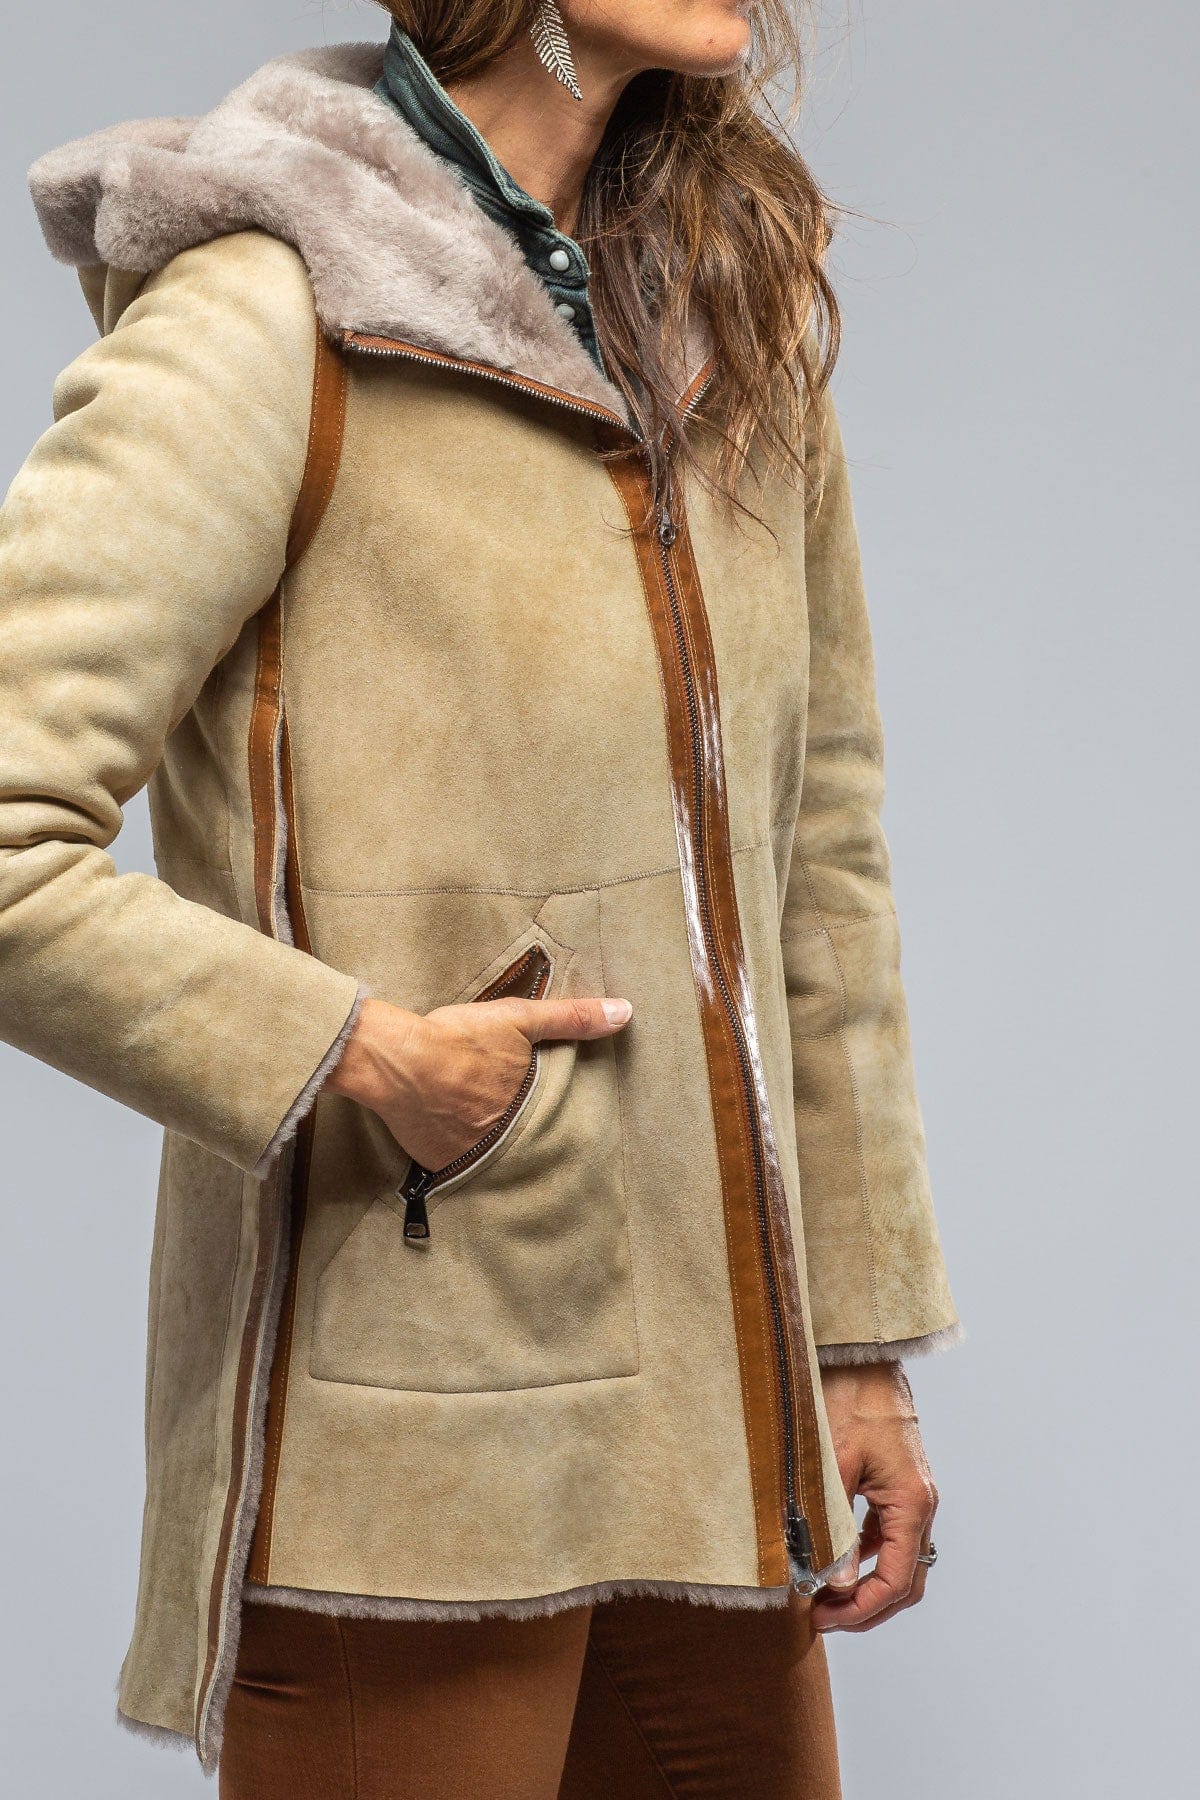 Trentino Reversible Side Snap Shearling In Cappuccino W/ Cognac Details - AXEL'S